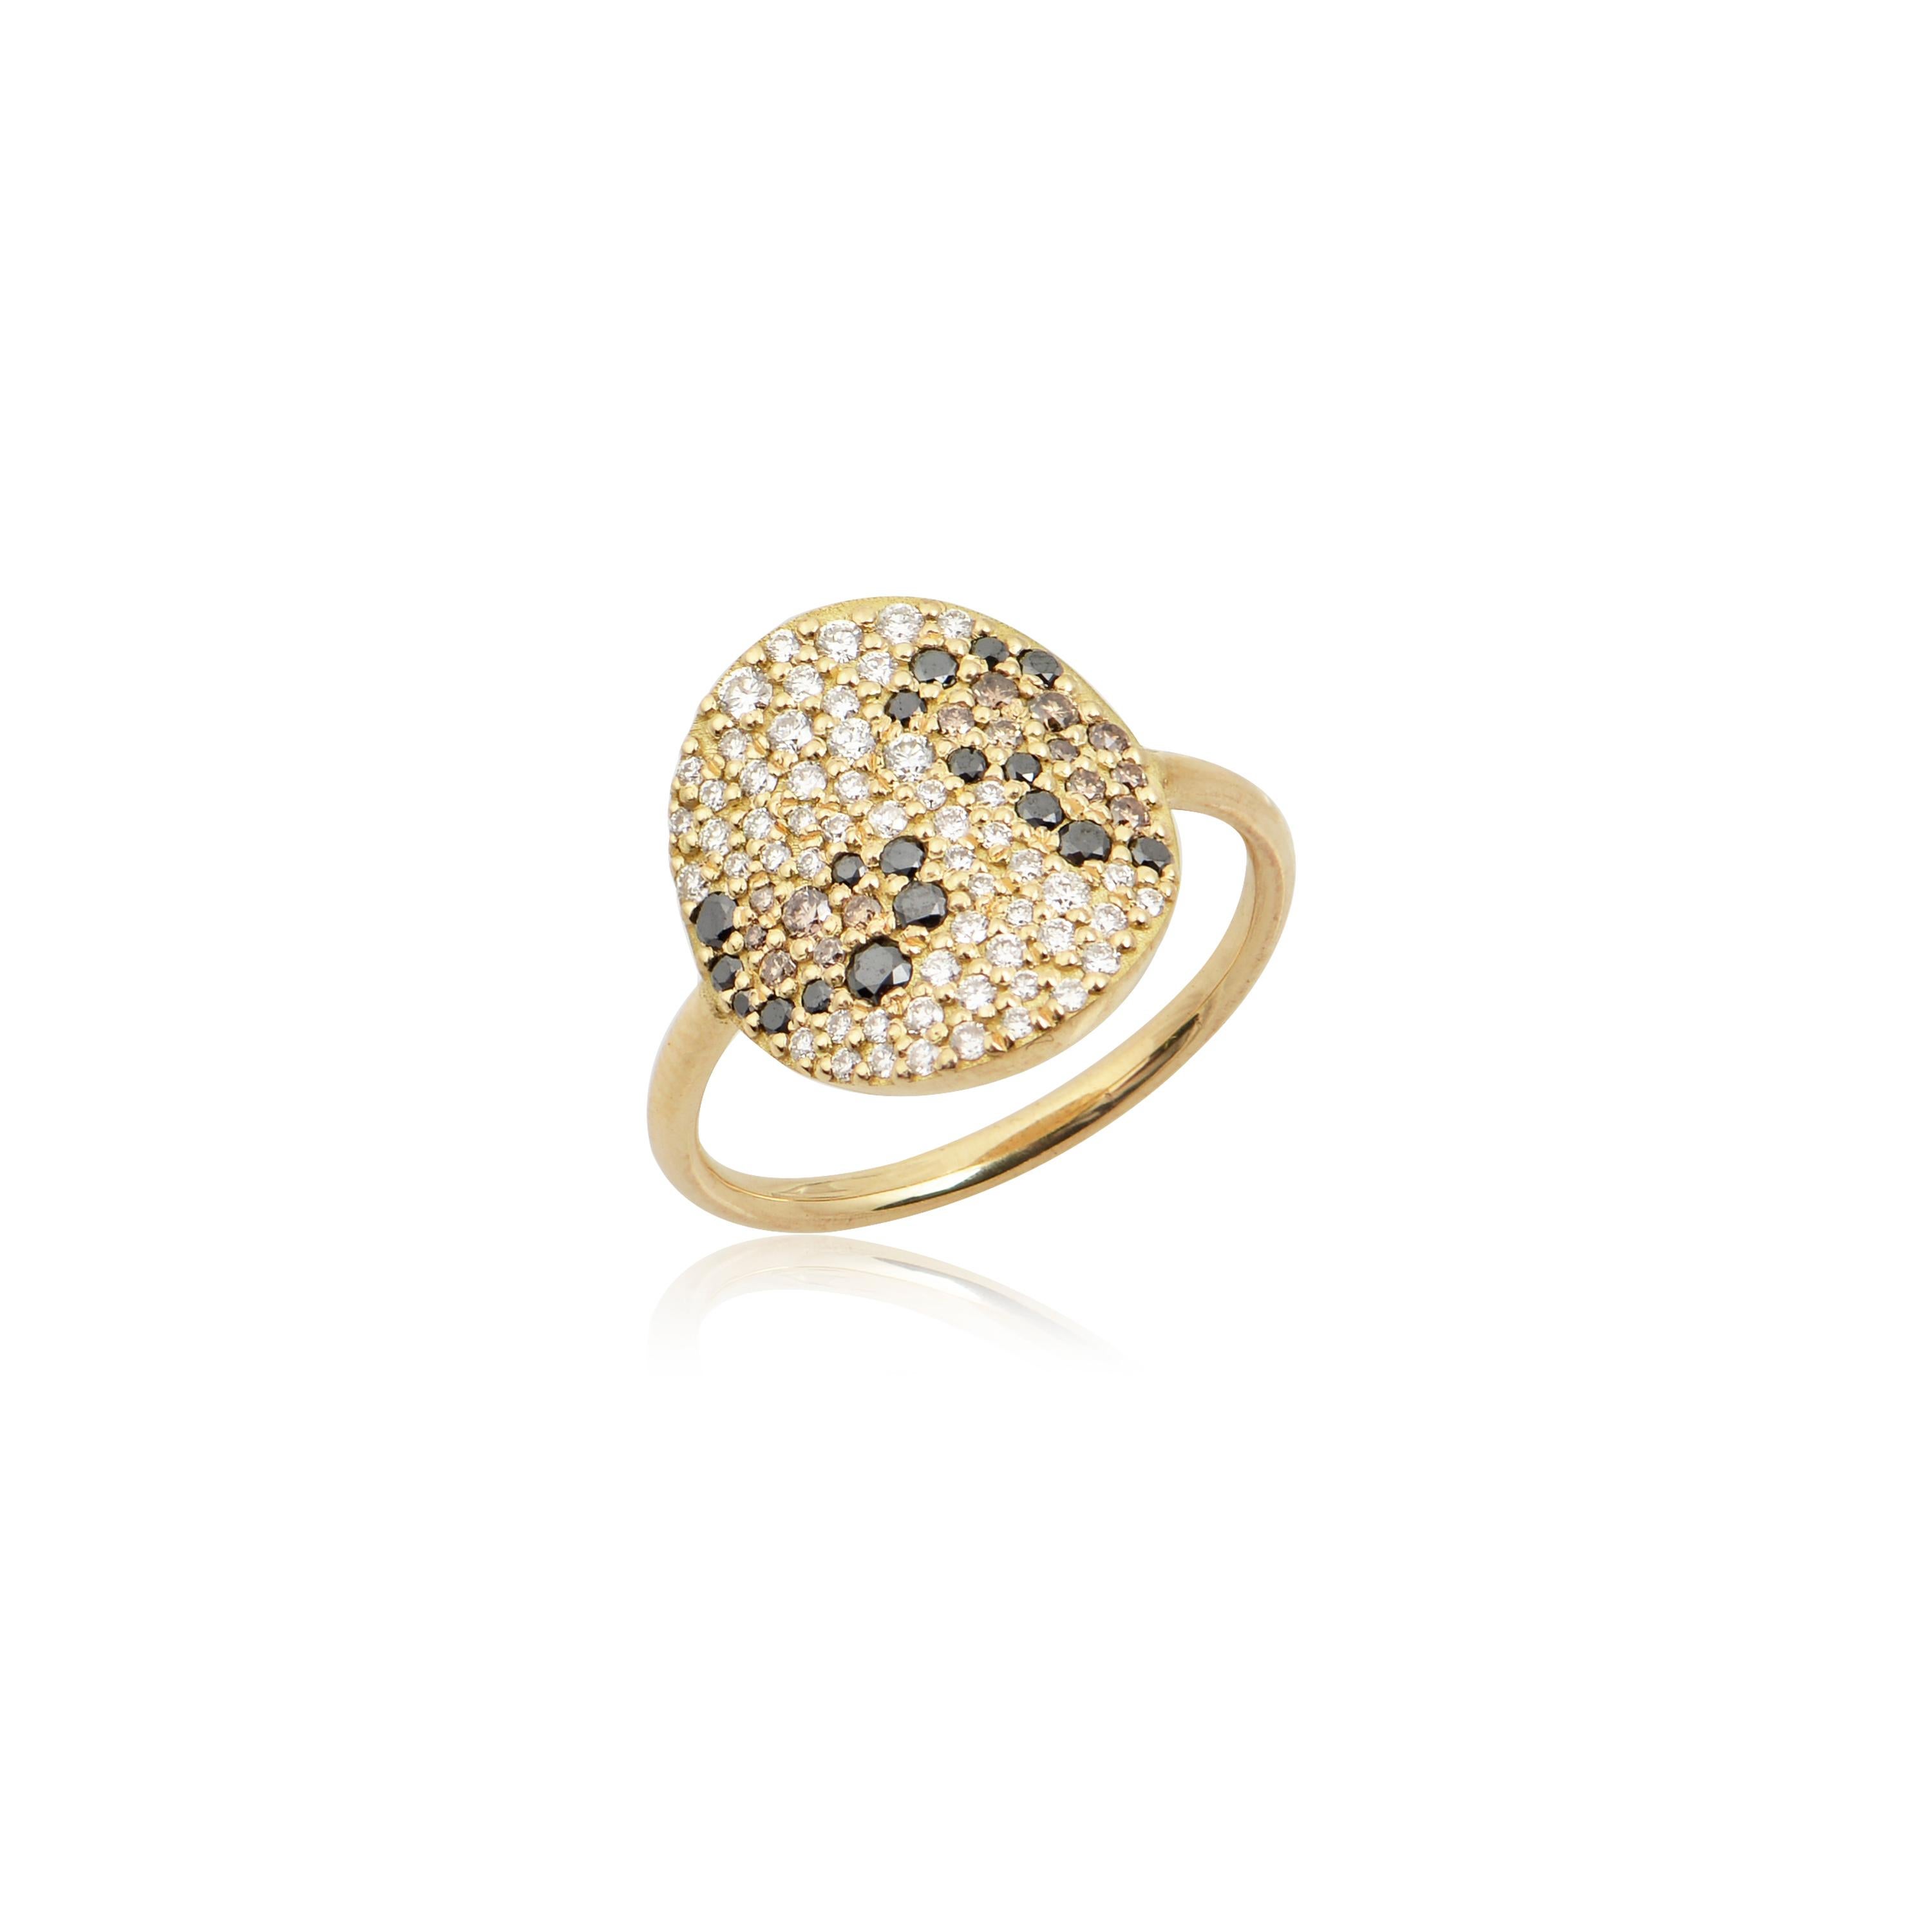 Designer: Alexia Gryllaki
Dimensions: L13x15mm
Ring Size UK L, US 5 3/4
Weight: approximately 4.3g  
Barcode: NEX2006

Leopard print signet ring in 18 karat yellow gold with colorless, black and brown brilliant-cut diamonds approx. 0.58cts.

The